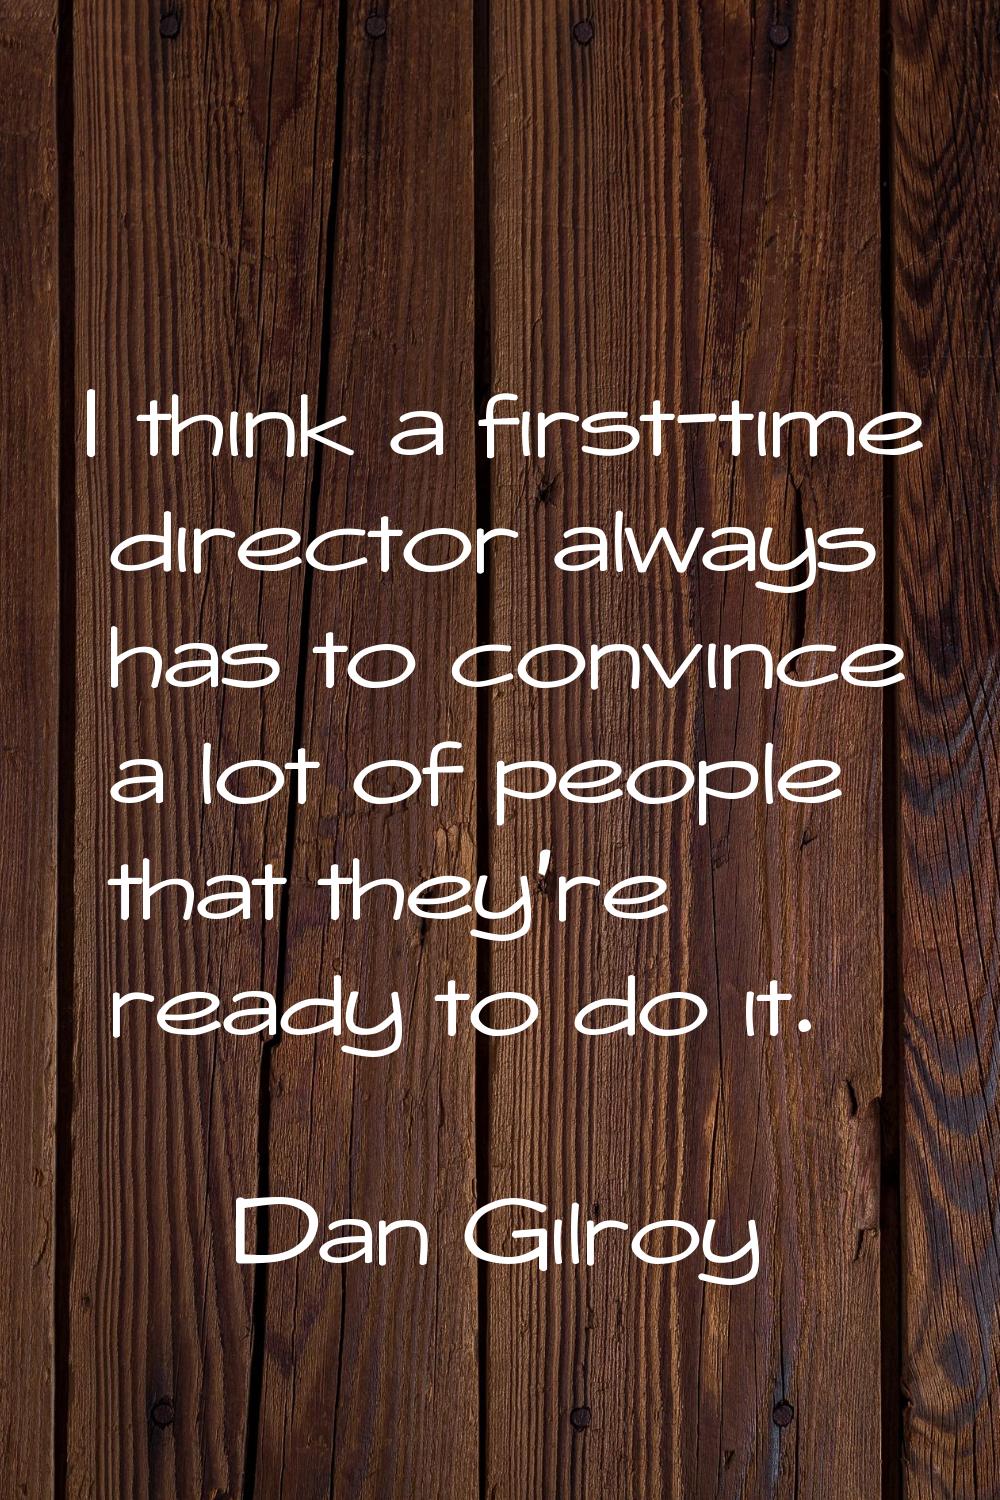 I think a first-time director always has to convince a lot of people that they're ready to do it.